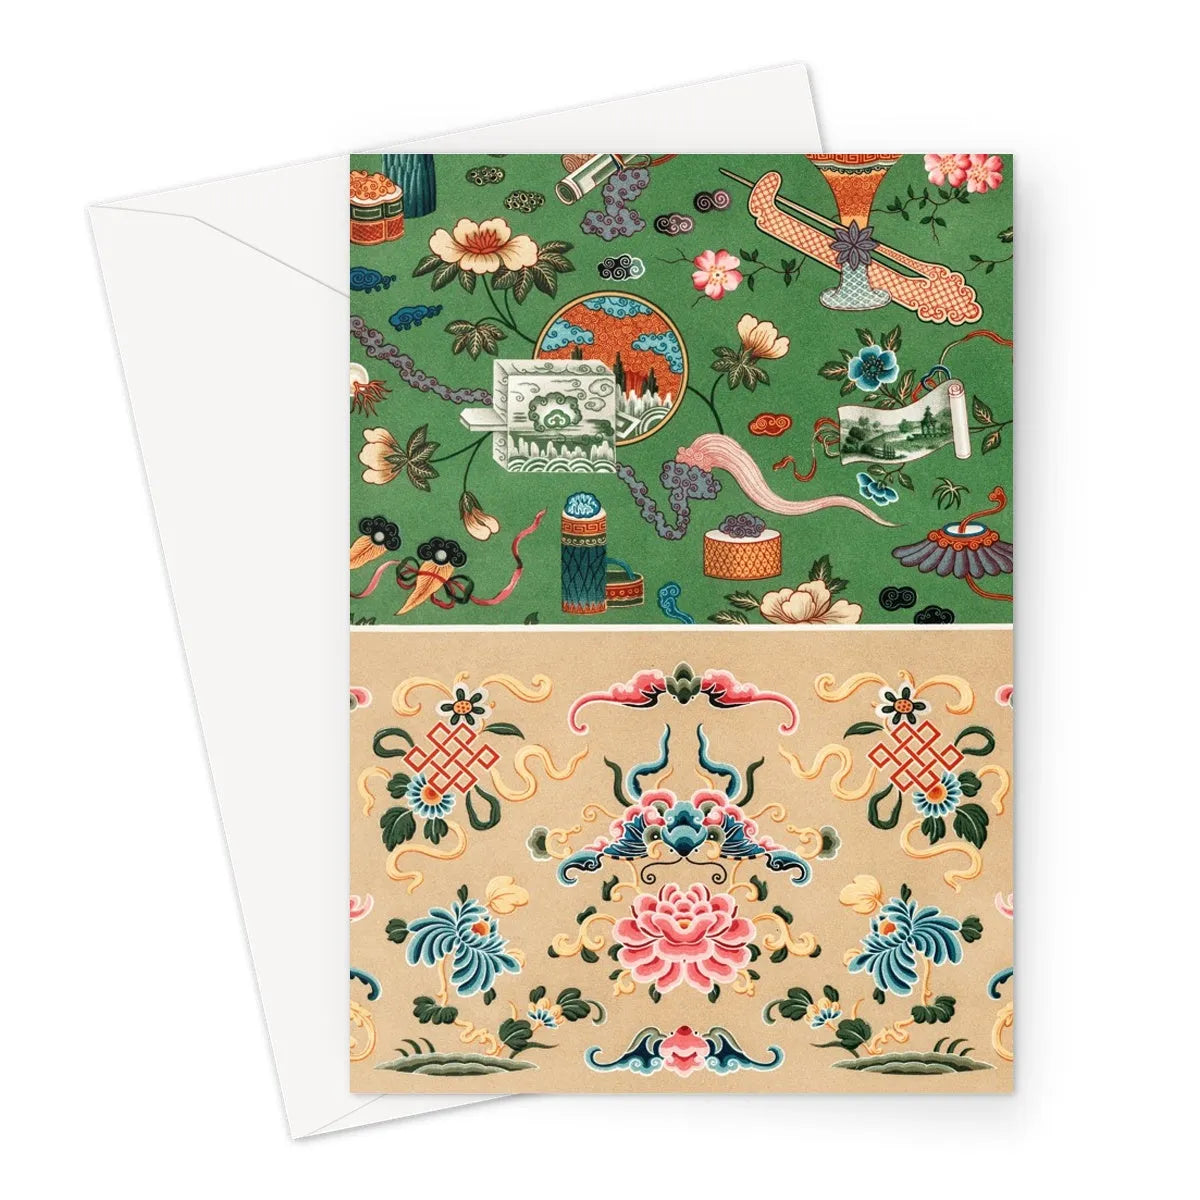 This Chinese Pattern By Auguste Racinet Greeting Card - A5 Portrait / 1 Card - Greeting & Note Cards - Aesthetic Art